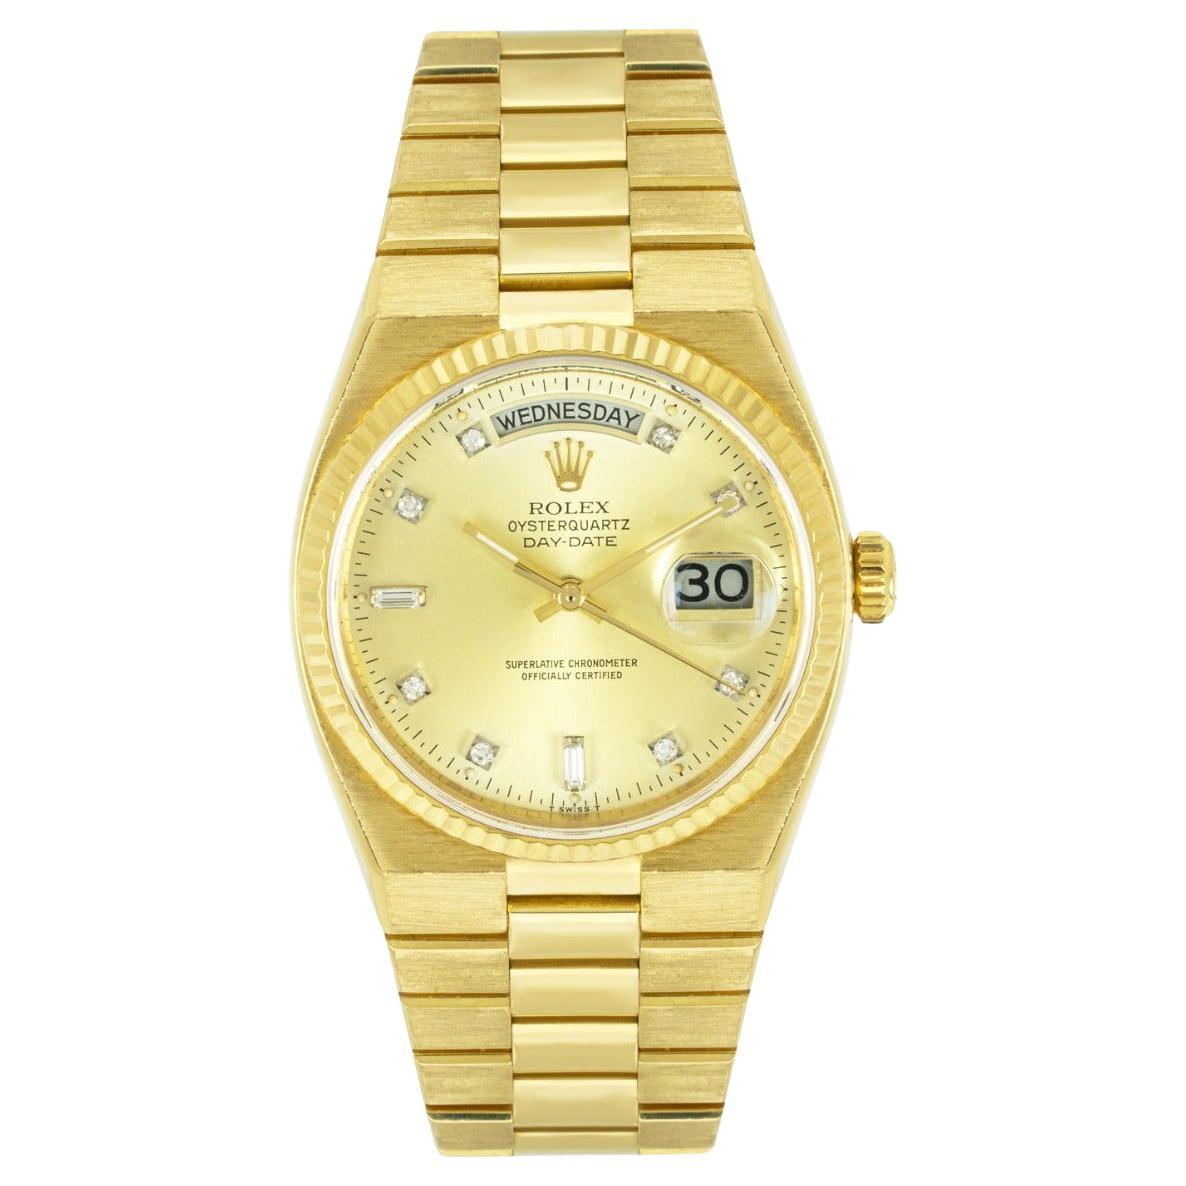 Rolex Oysterquartz Day-Date Yellow Gold Diamond Dial 19018 For Sale